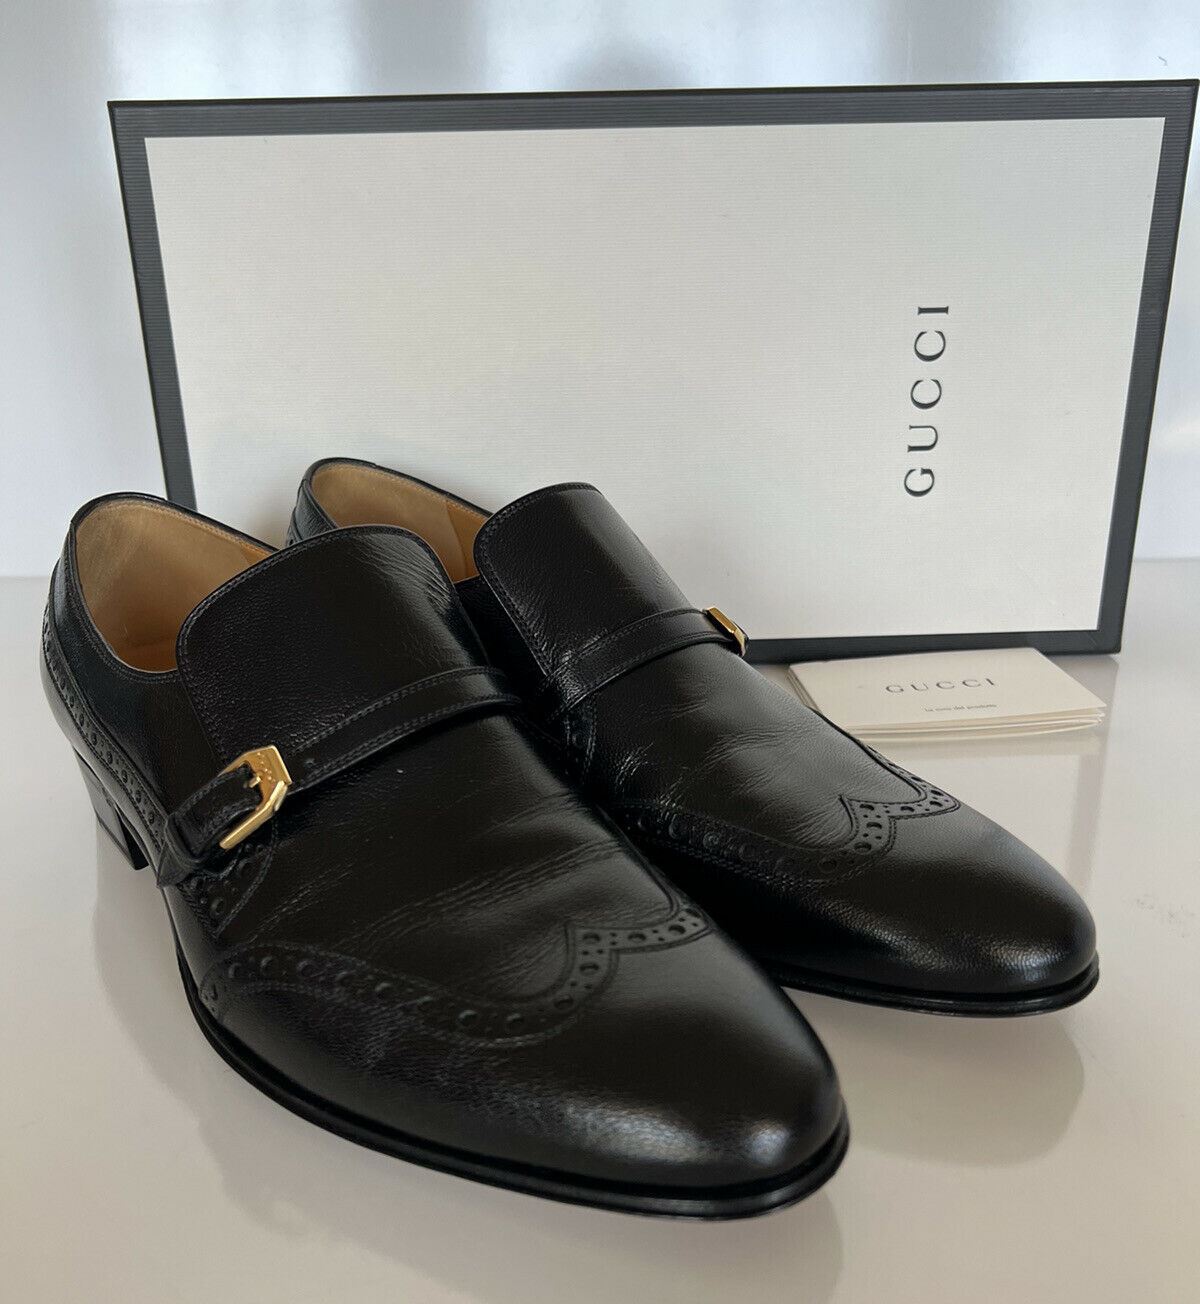 NIB Gucci Men's Leather Shoes Black 8.5 US (Gucci 7.5) Italy 624657